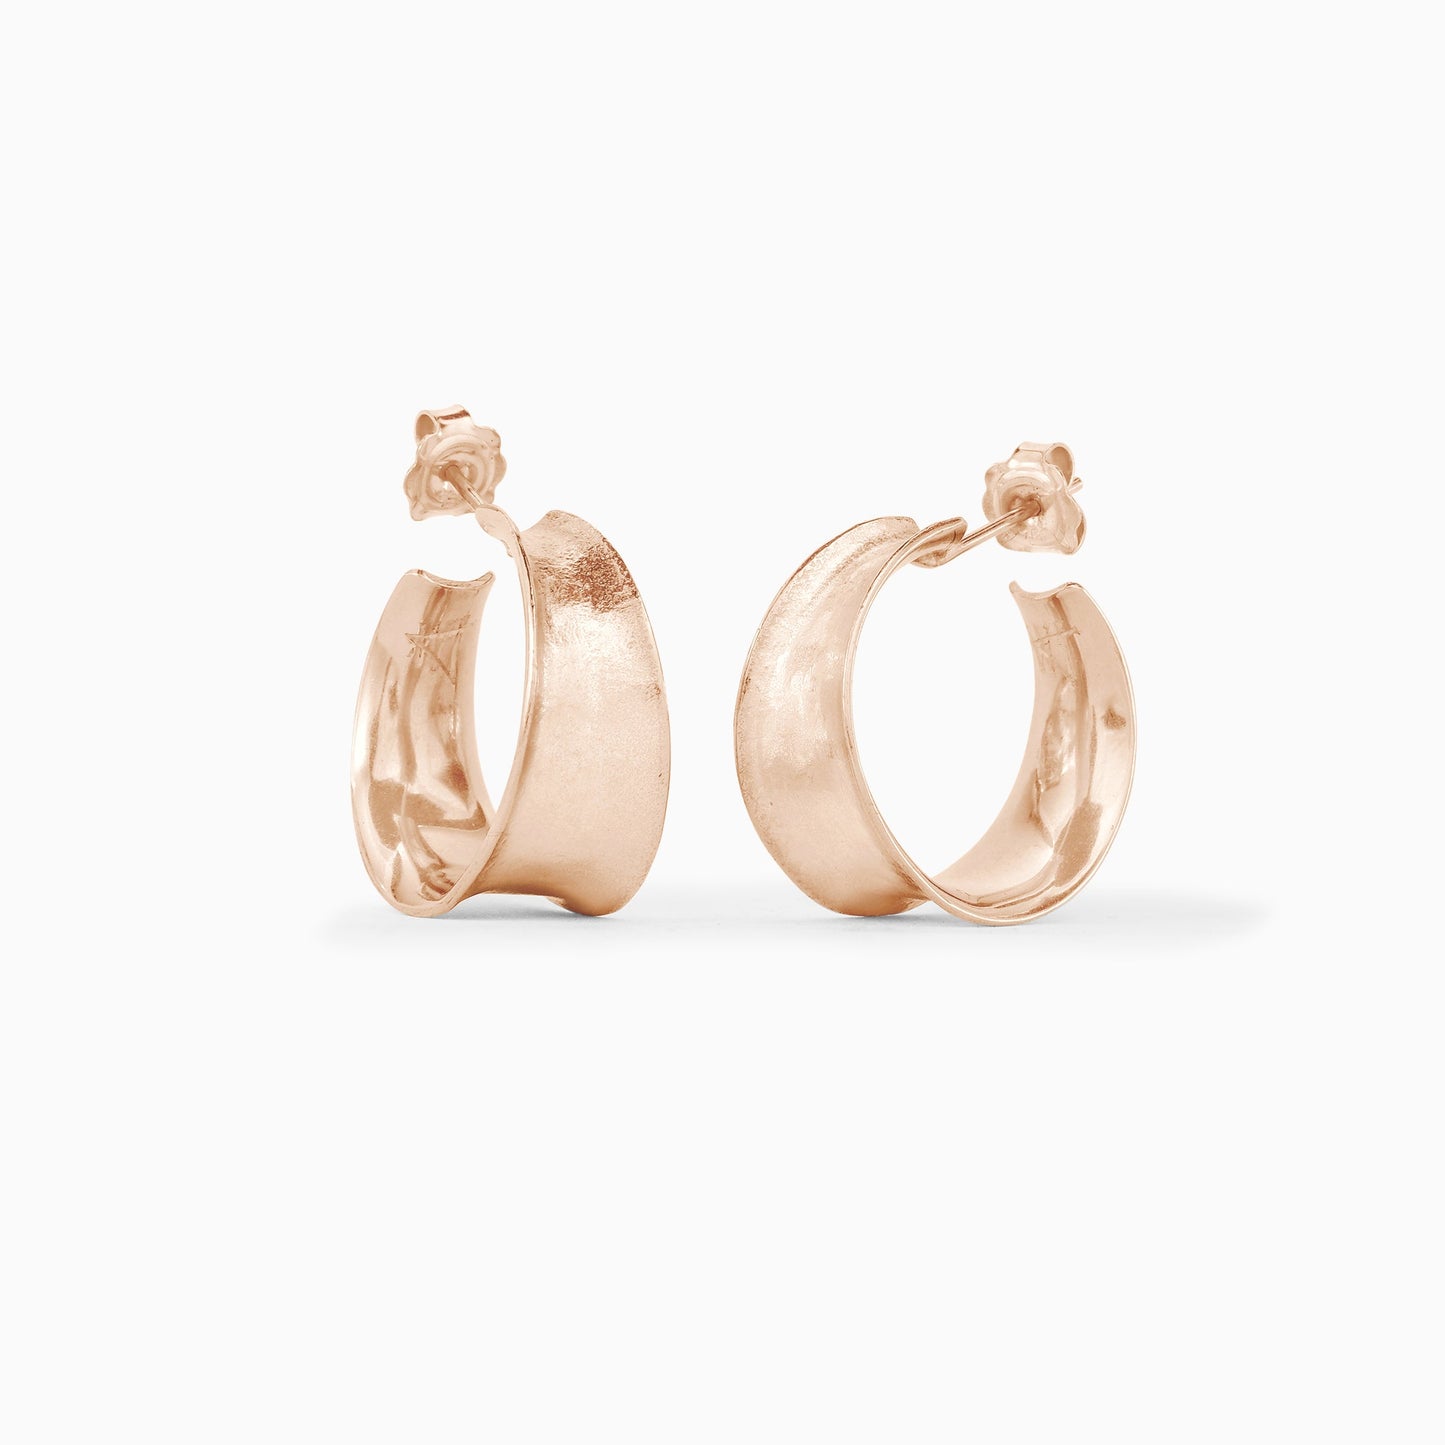 A pair of 18ct Fairtrade rose gold  round hoop earrings tapering in width from 11mm at the bottom to 6mm at the top. Gentle organic texture and form, concave outer surface. 24mm outside diameter with a stud fastening.